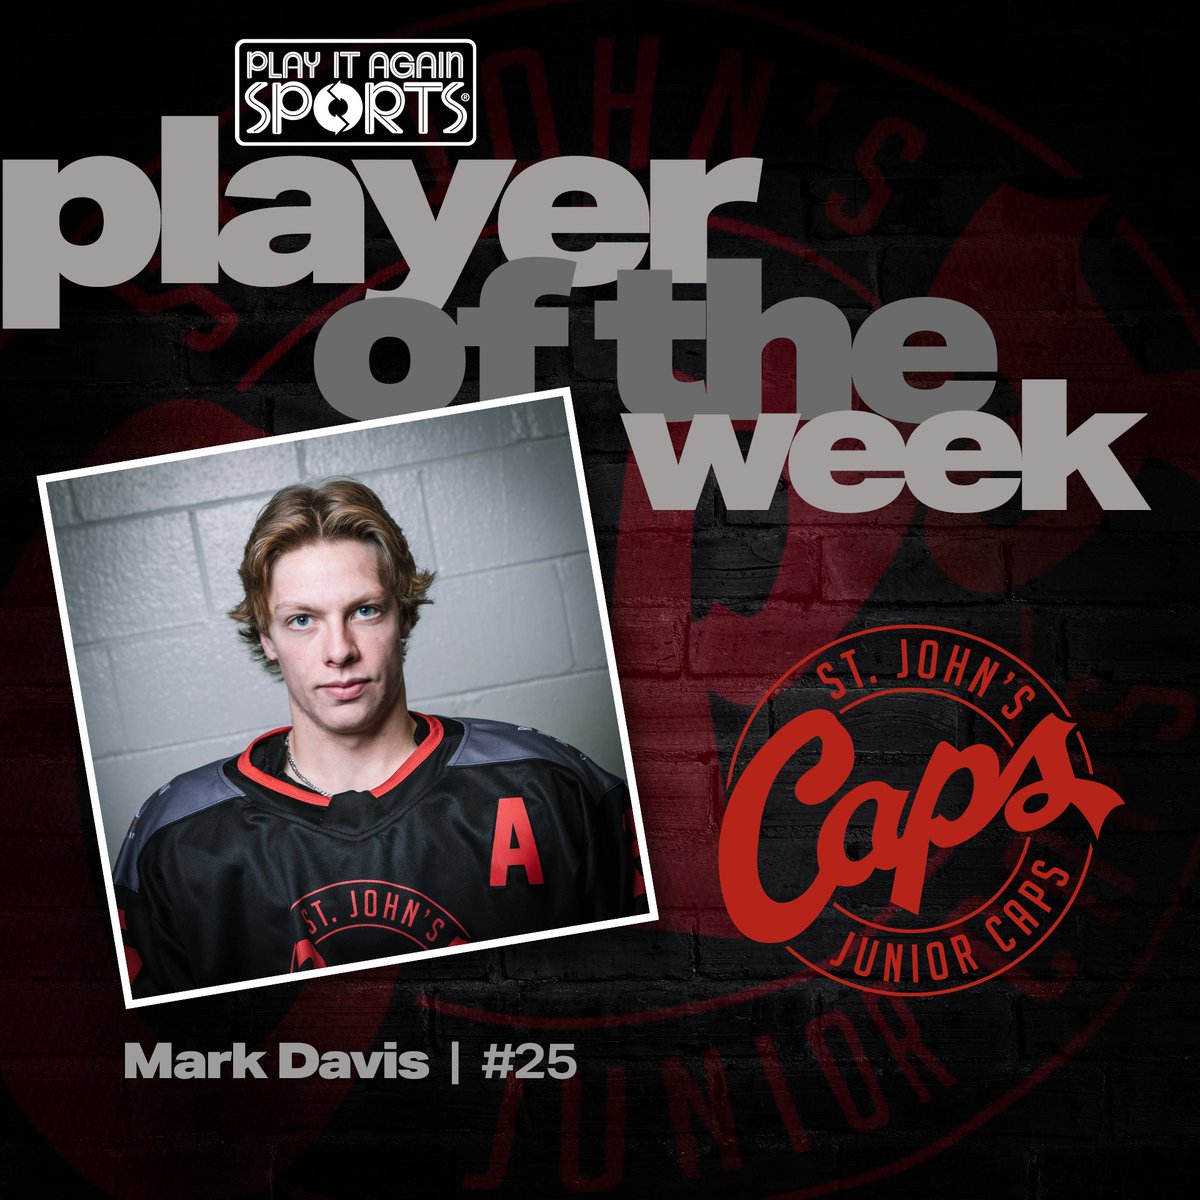 Congratulations to Mark Davis, our Play it Again Sports Player of the Week! In Game 1 of the best-of-seven Semifinal series against the CBN Junior Stars last weekend, Mark's two goals and hard work played a crucial role in our victory. Congrats, Mark! #PlayerOfTheWeek #JuniorCaps